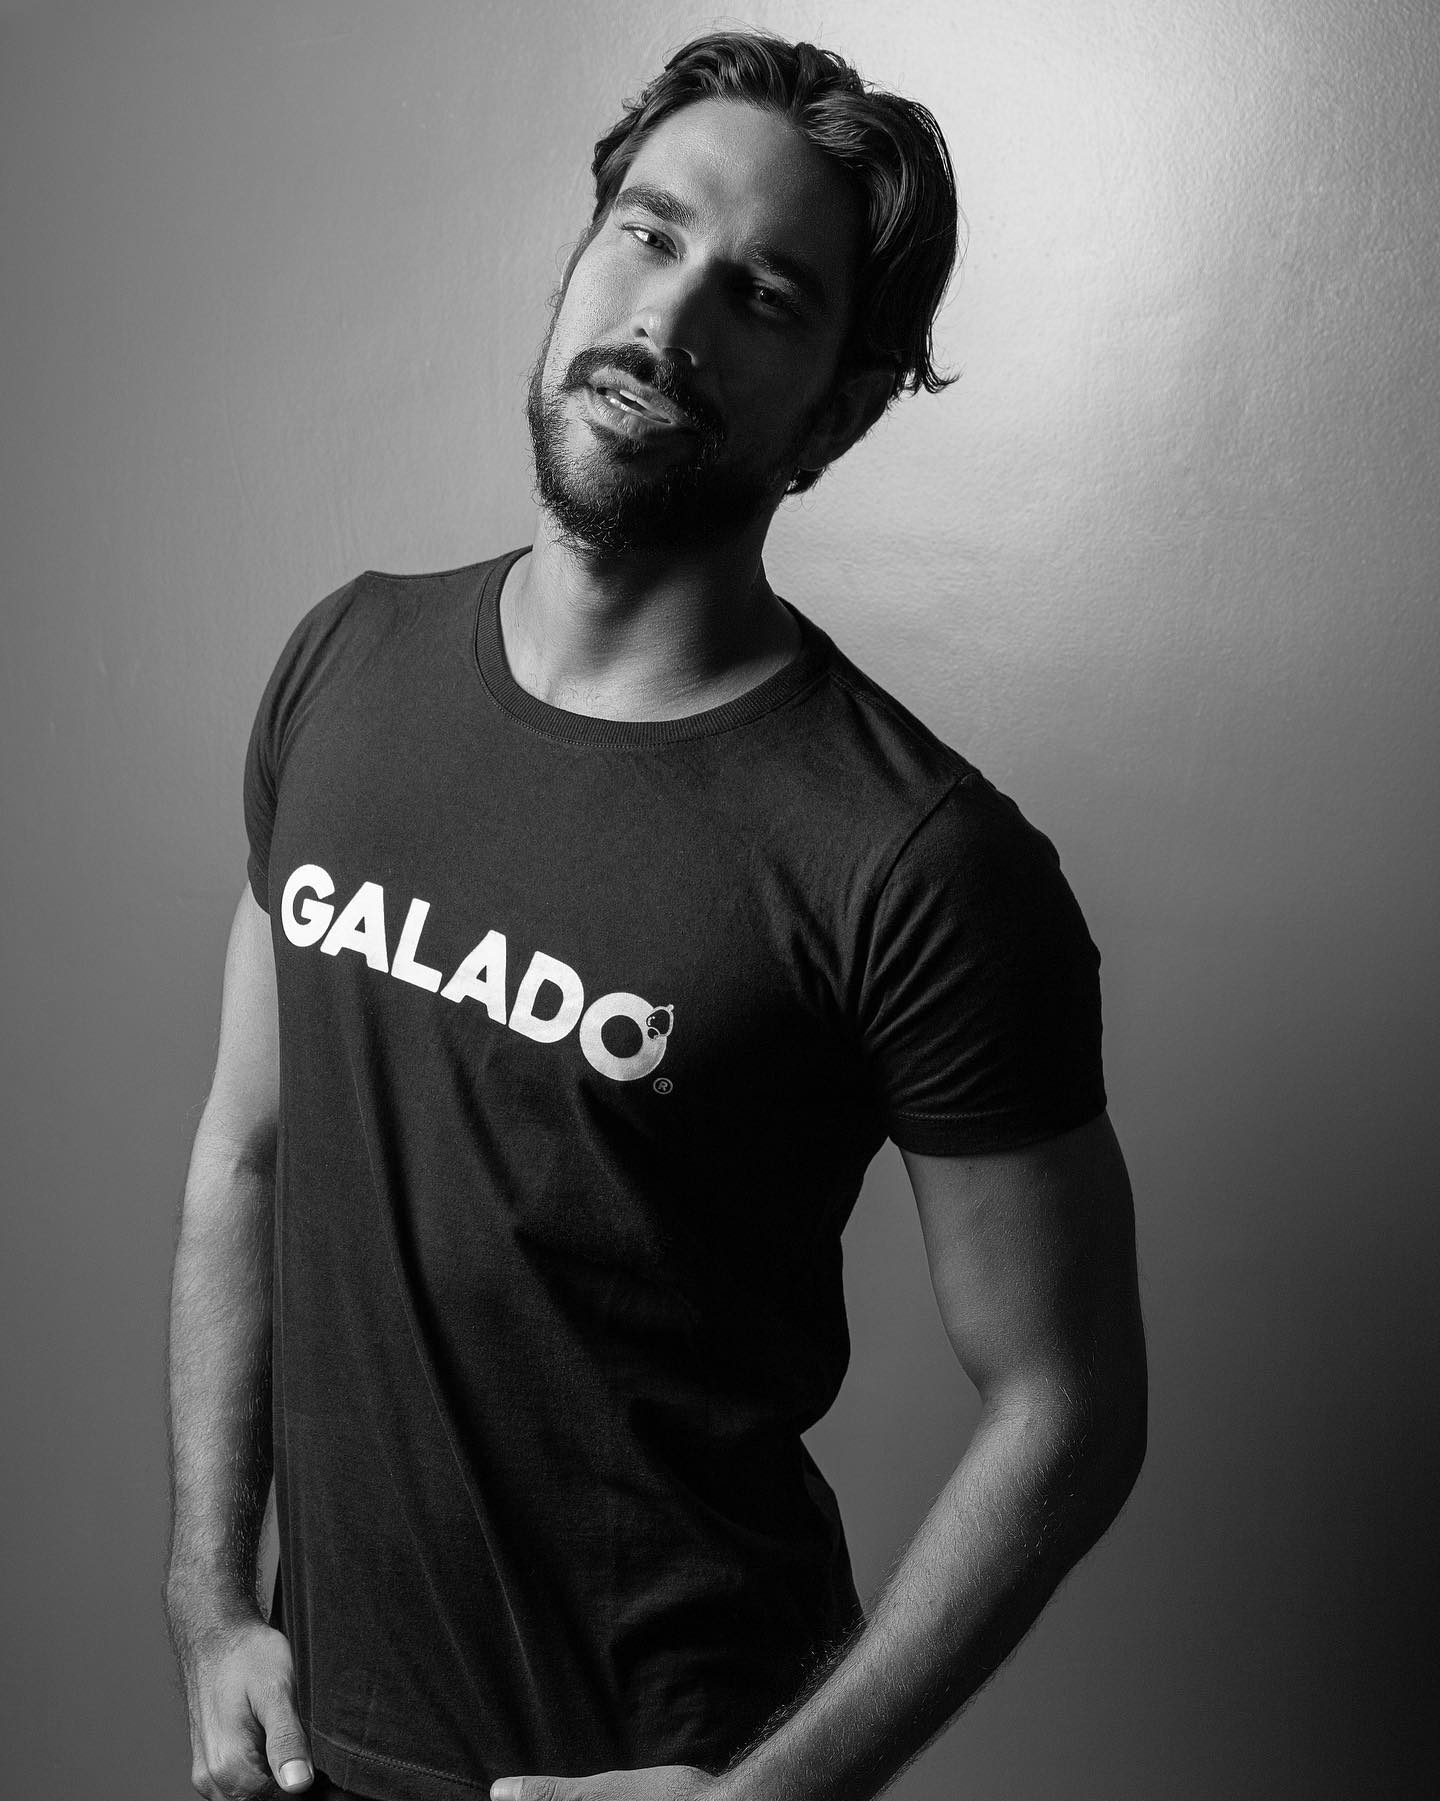 https://d.radikal.host/2023/04/06/Photo-by-Matteus-Cardoso-on-March-07-2023.-May-be-a-black-and-white-image-of-1-person-beard-and-text-that-says-GALADO..jpg